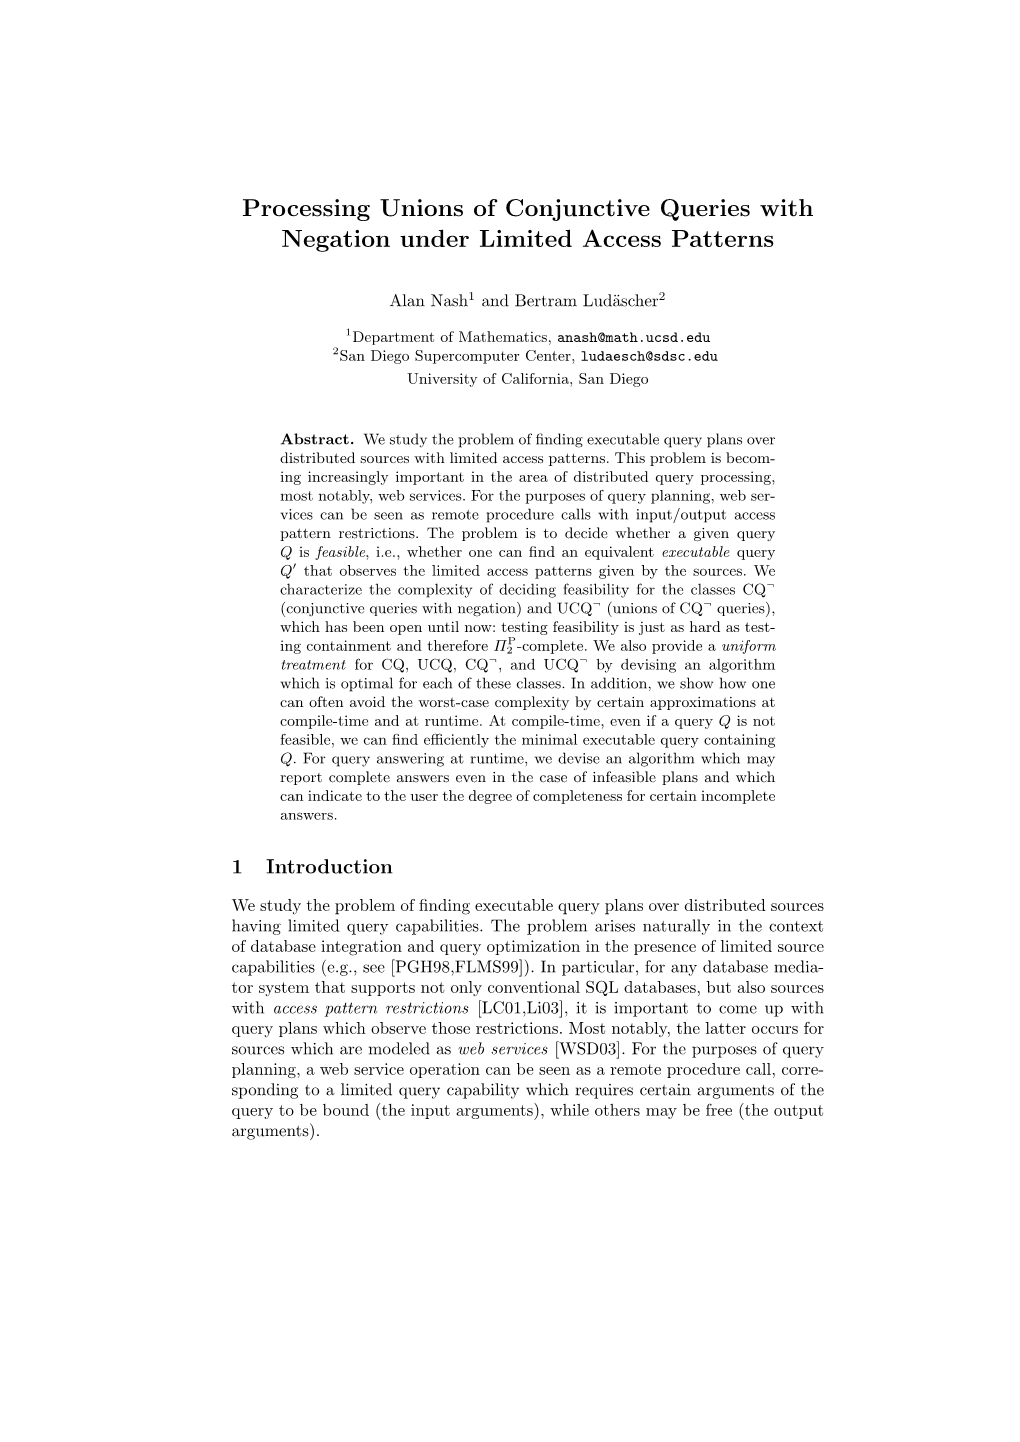 Processing Unions of Conjunctive Queries with Negation Under Limited Access Patterns